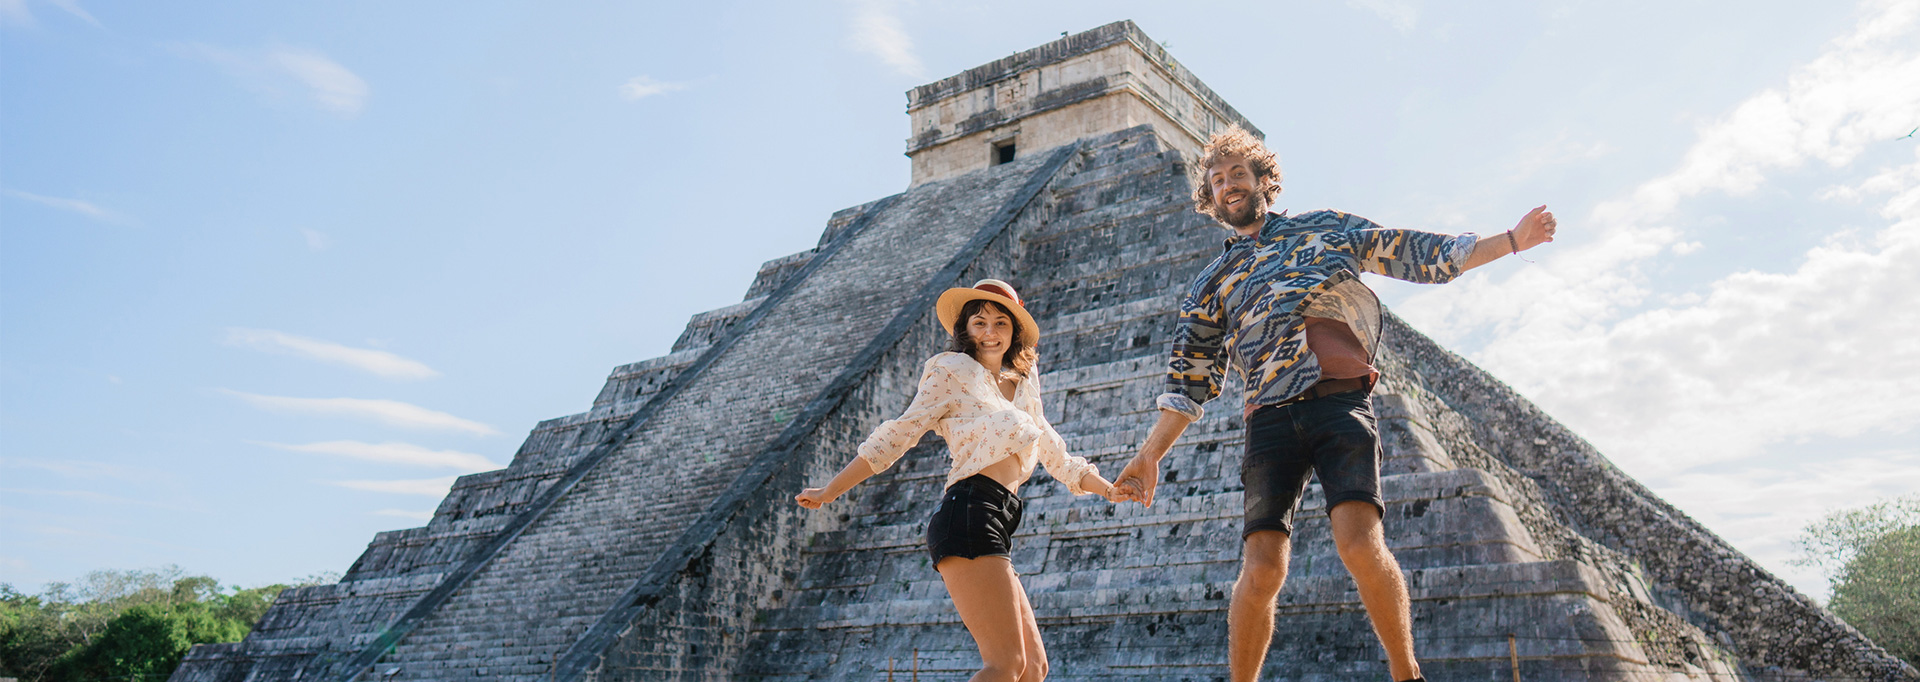 couple jumping at Chichen Itza in Mexico